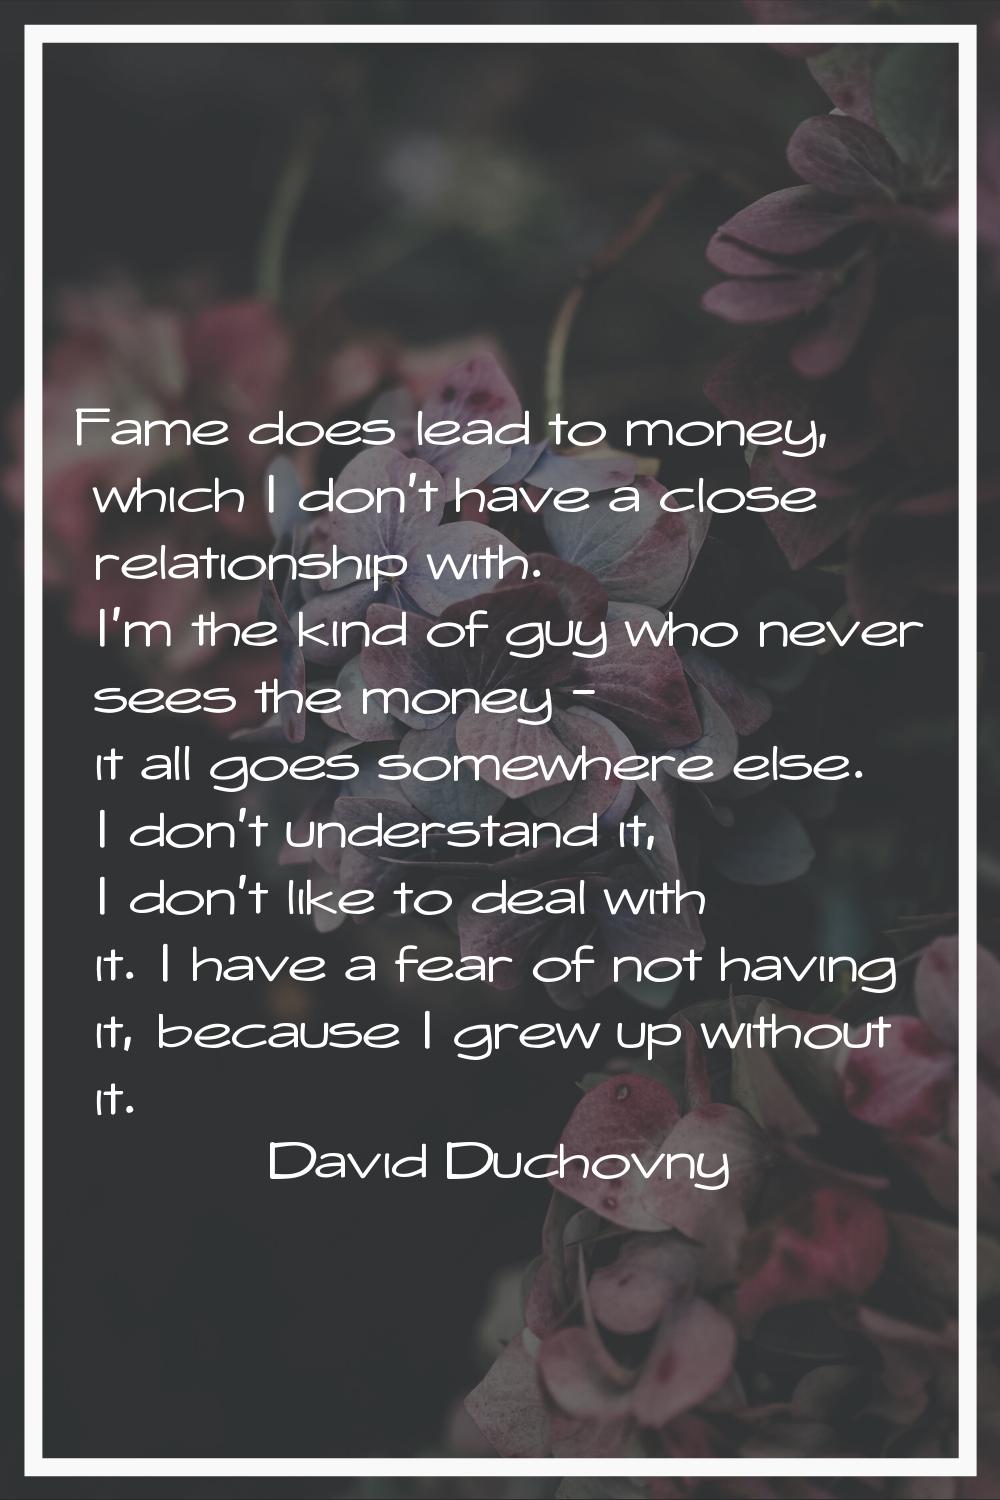 Fame does lead to money, which I don't have a close relationship with. I'm the kind of guy who neve